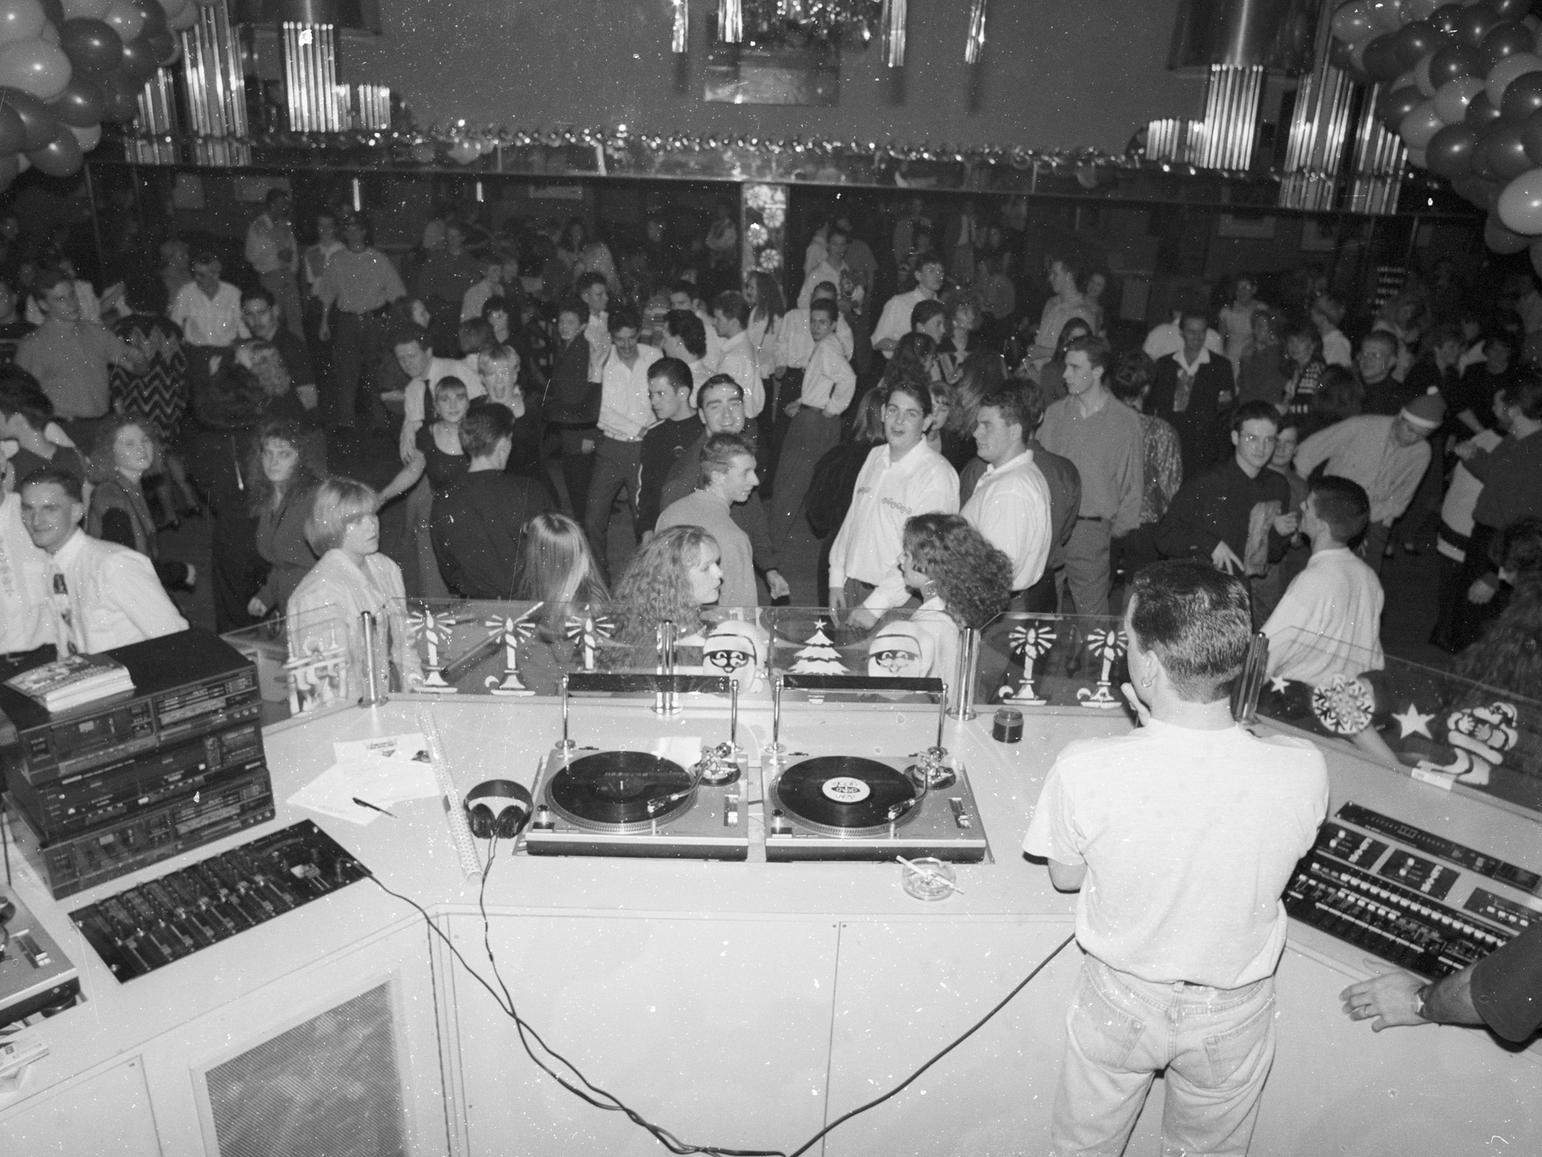 Some revellers have a shirt and tie on and even a Santa hat. But which nightclub was this photo taken in?